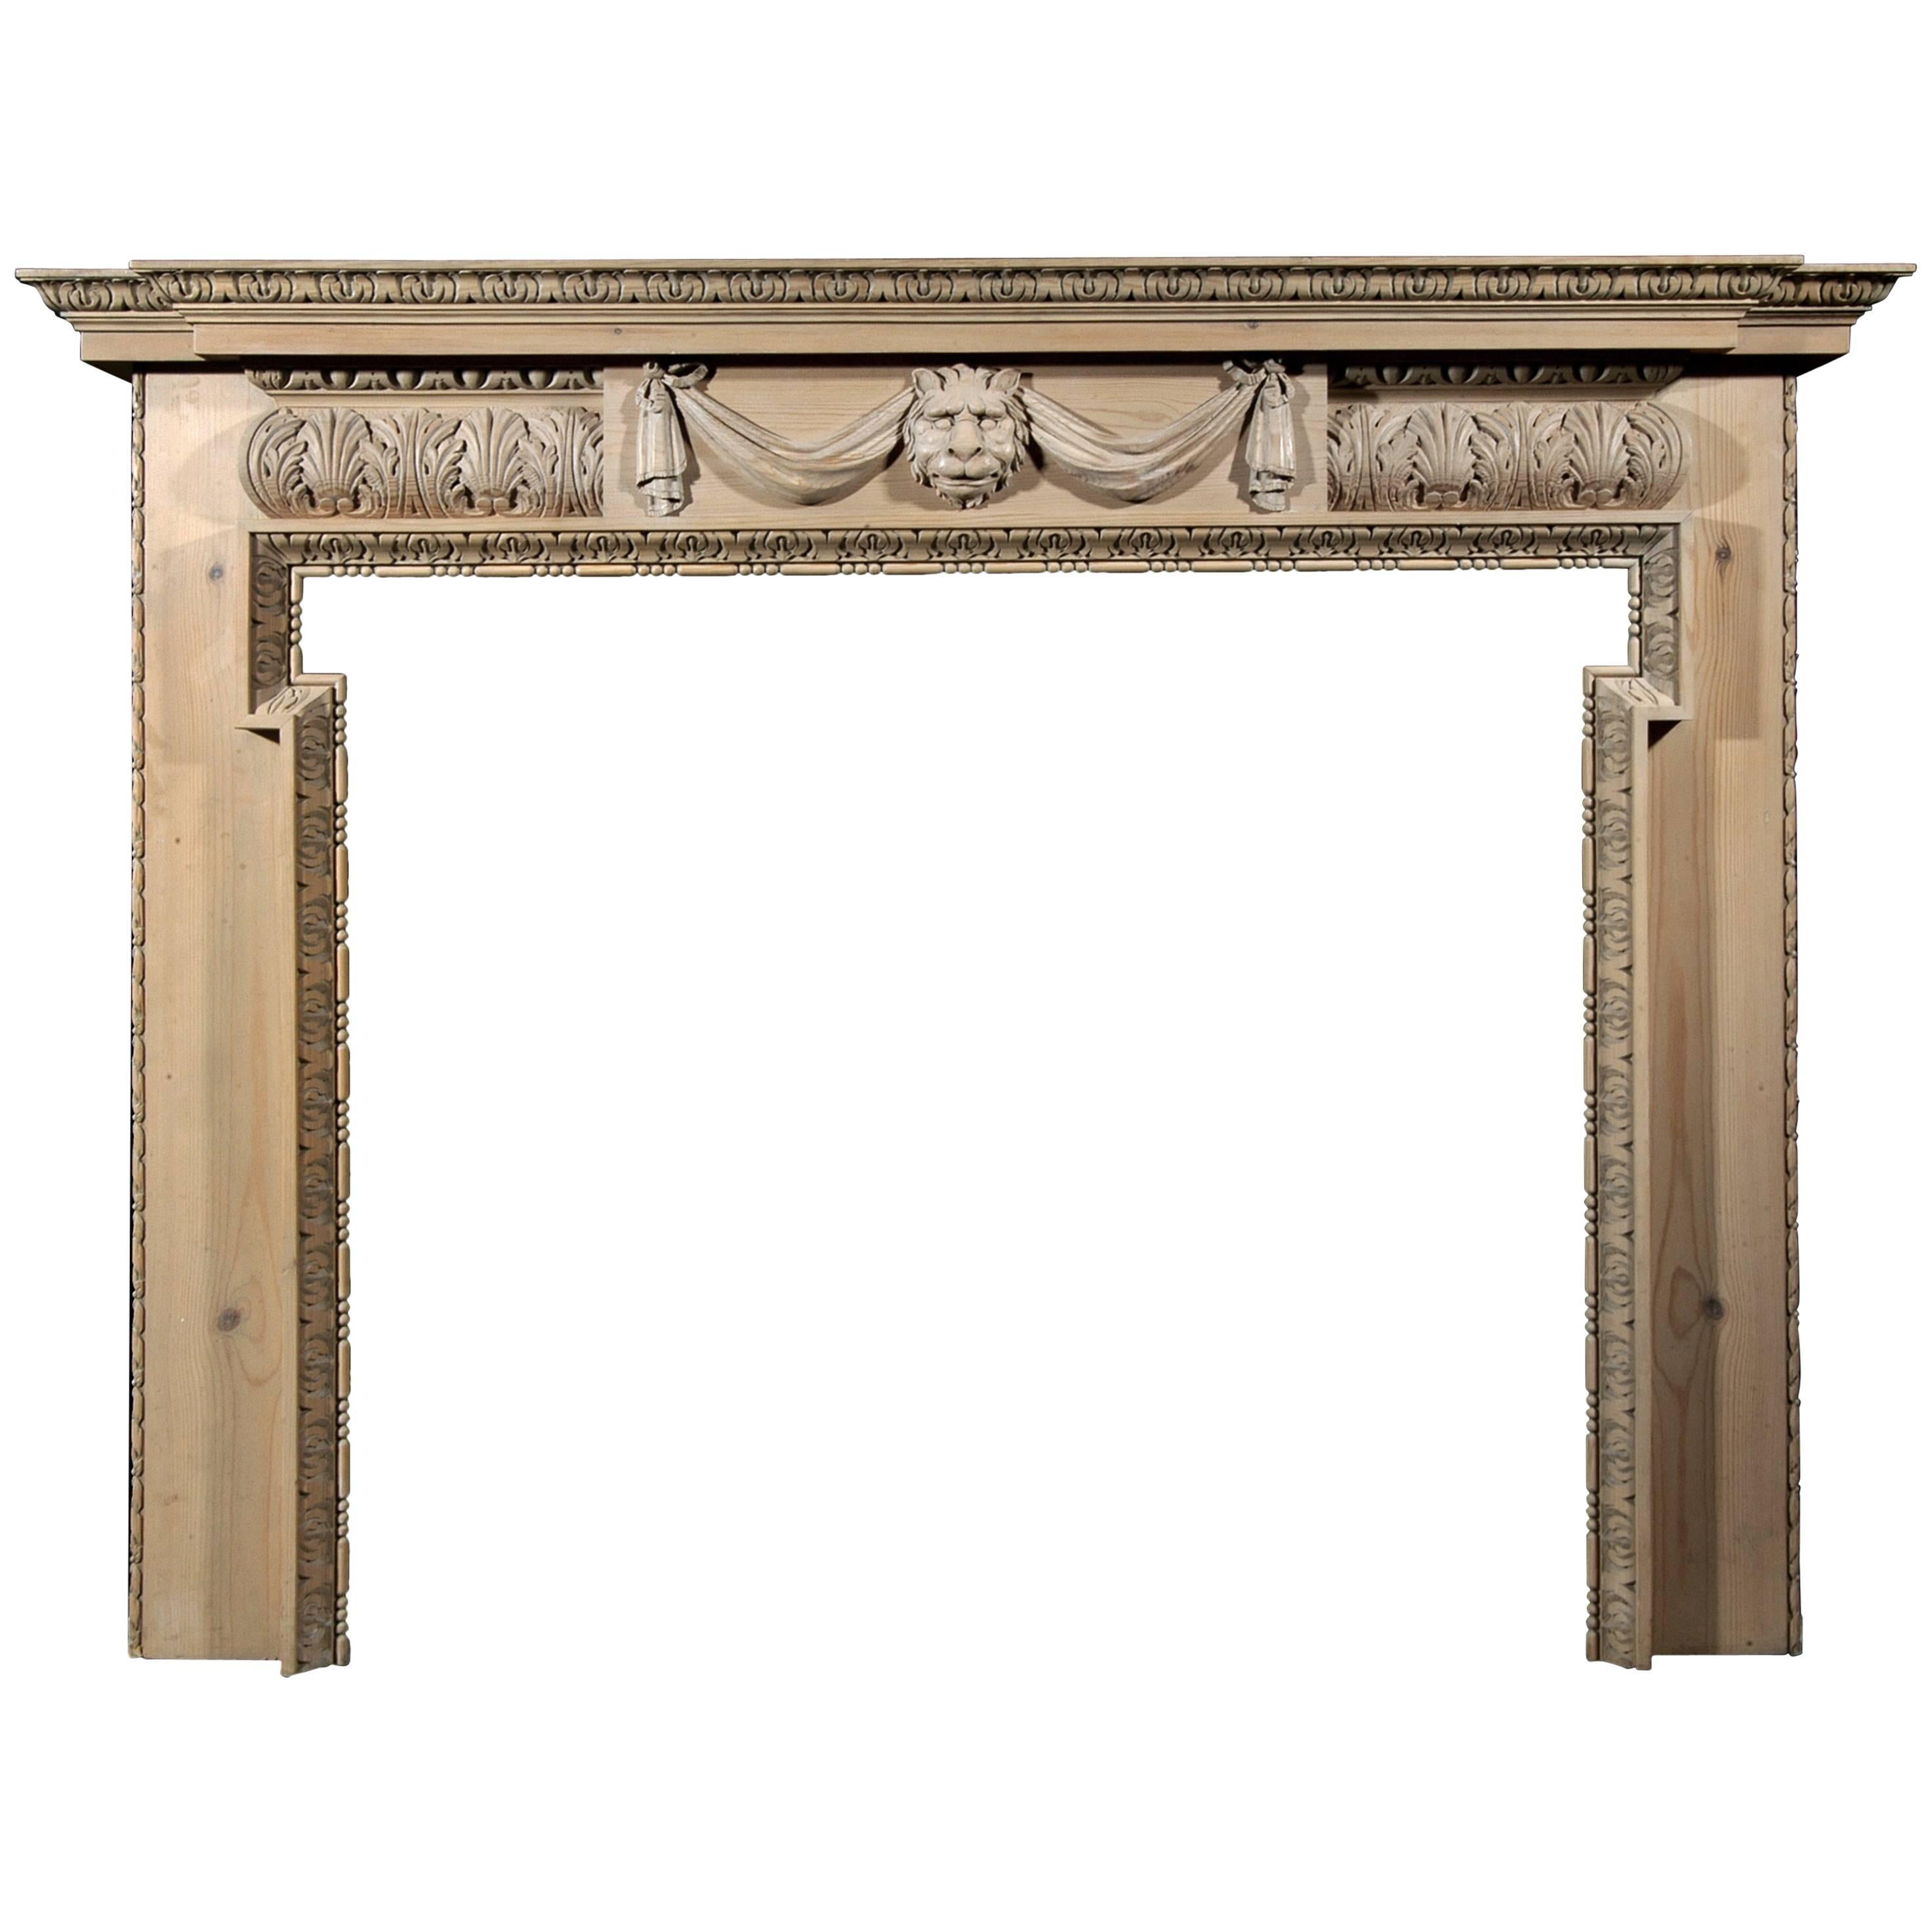 Carved Pine Fireplace with Lion's Mask and Drapery